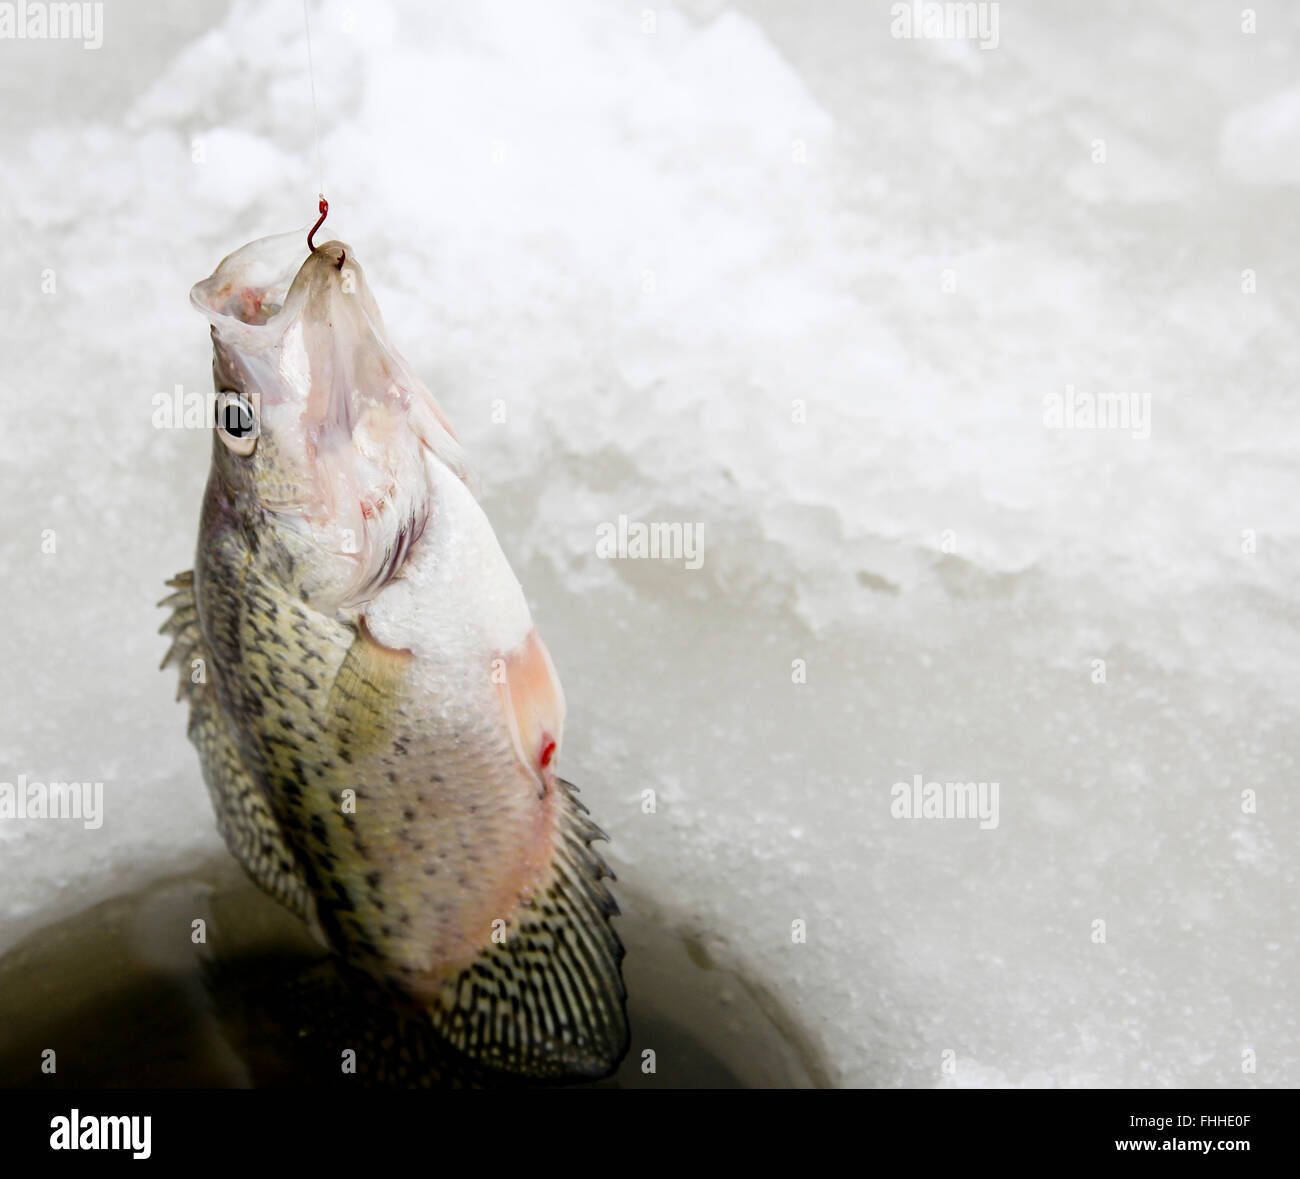 Crappie being pulled out of an ice fishing hole after being hooked Stock Photo